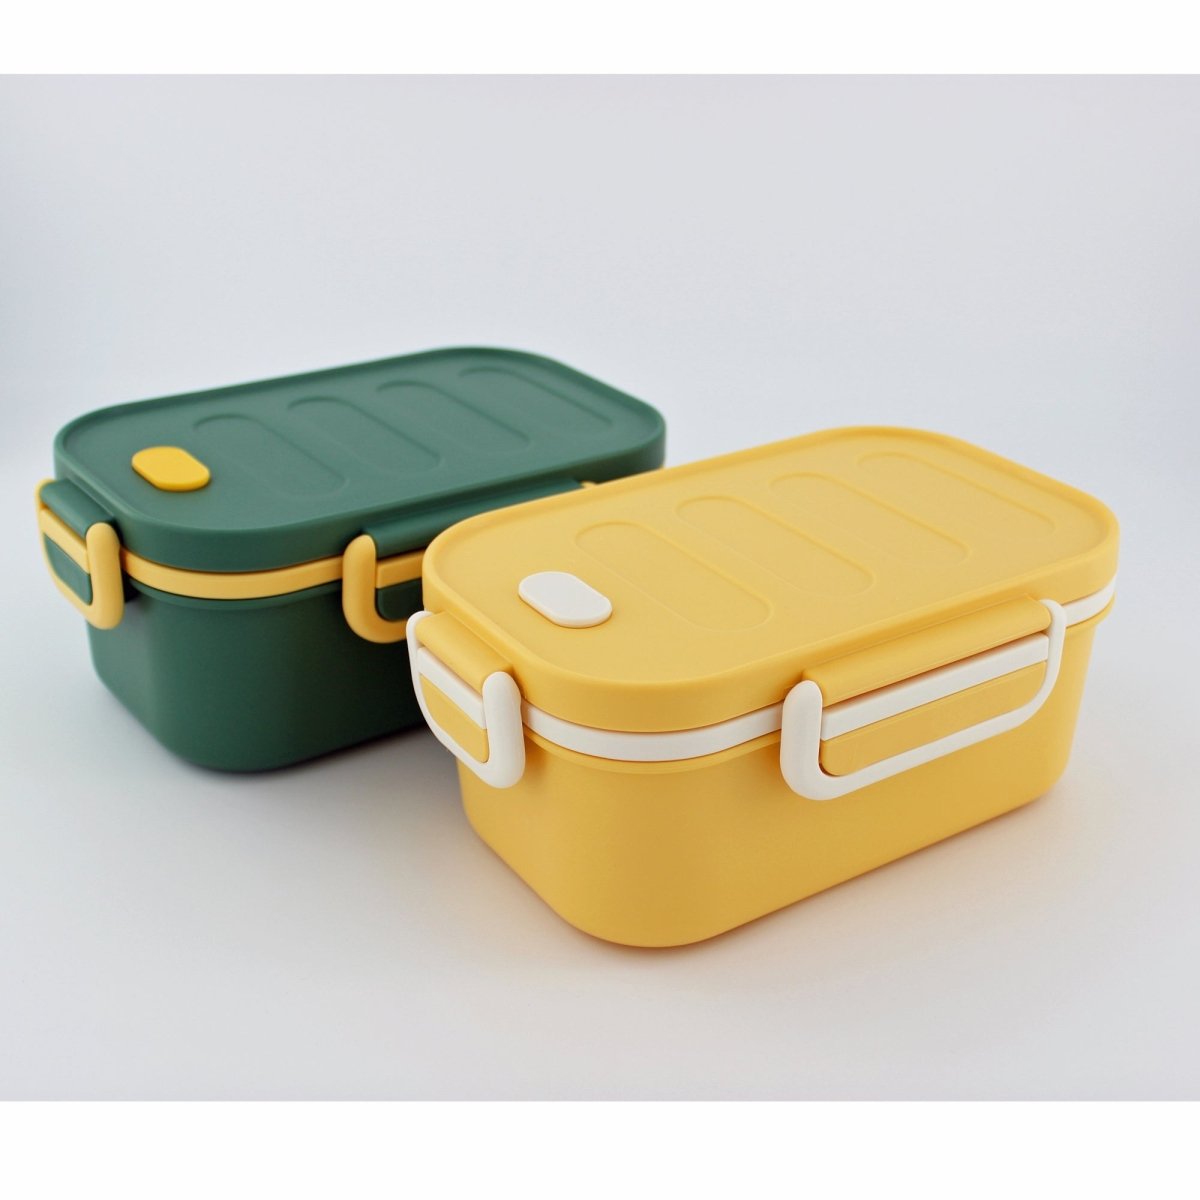 2 Layers Bento Box Lunch Container for Kids Men Women, Leakproof and Durable Lunch Box